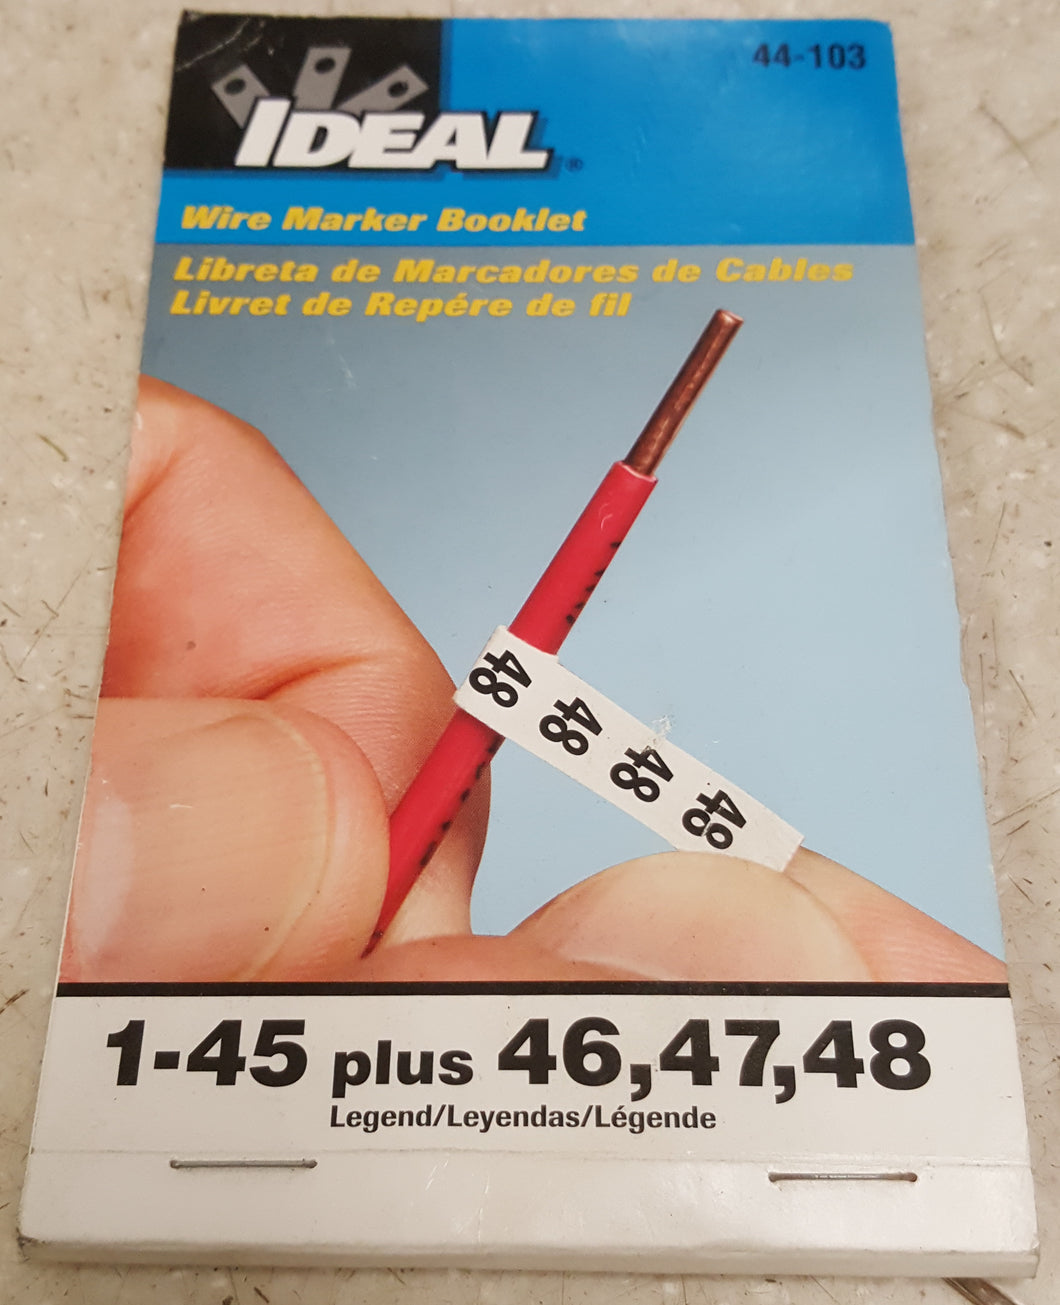 Ideal 44-103 Wire Marker Booklet